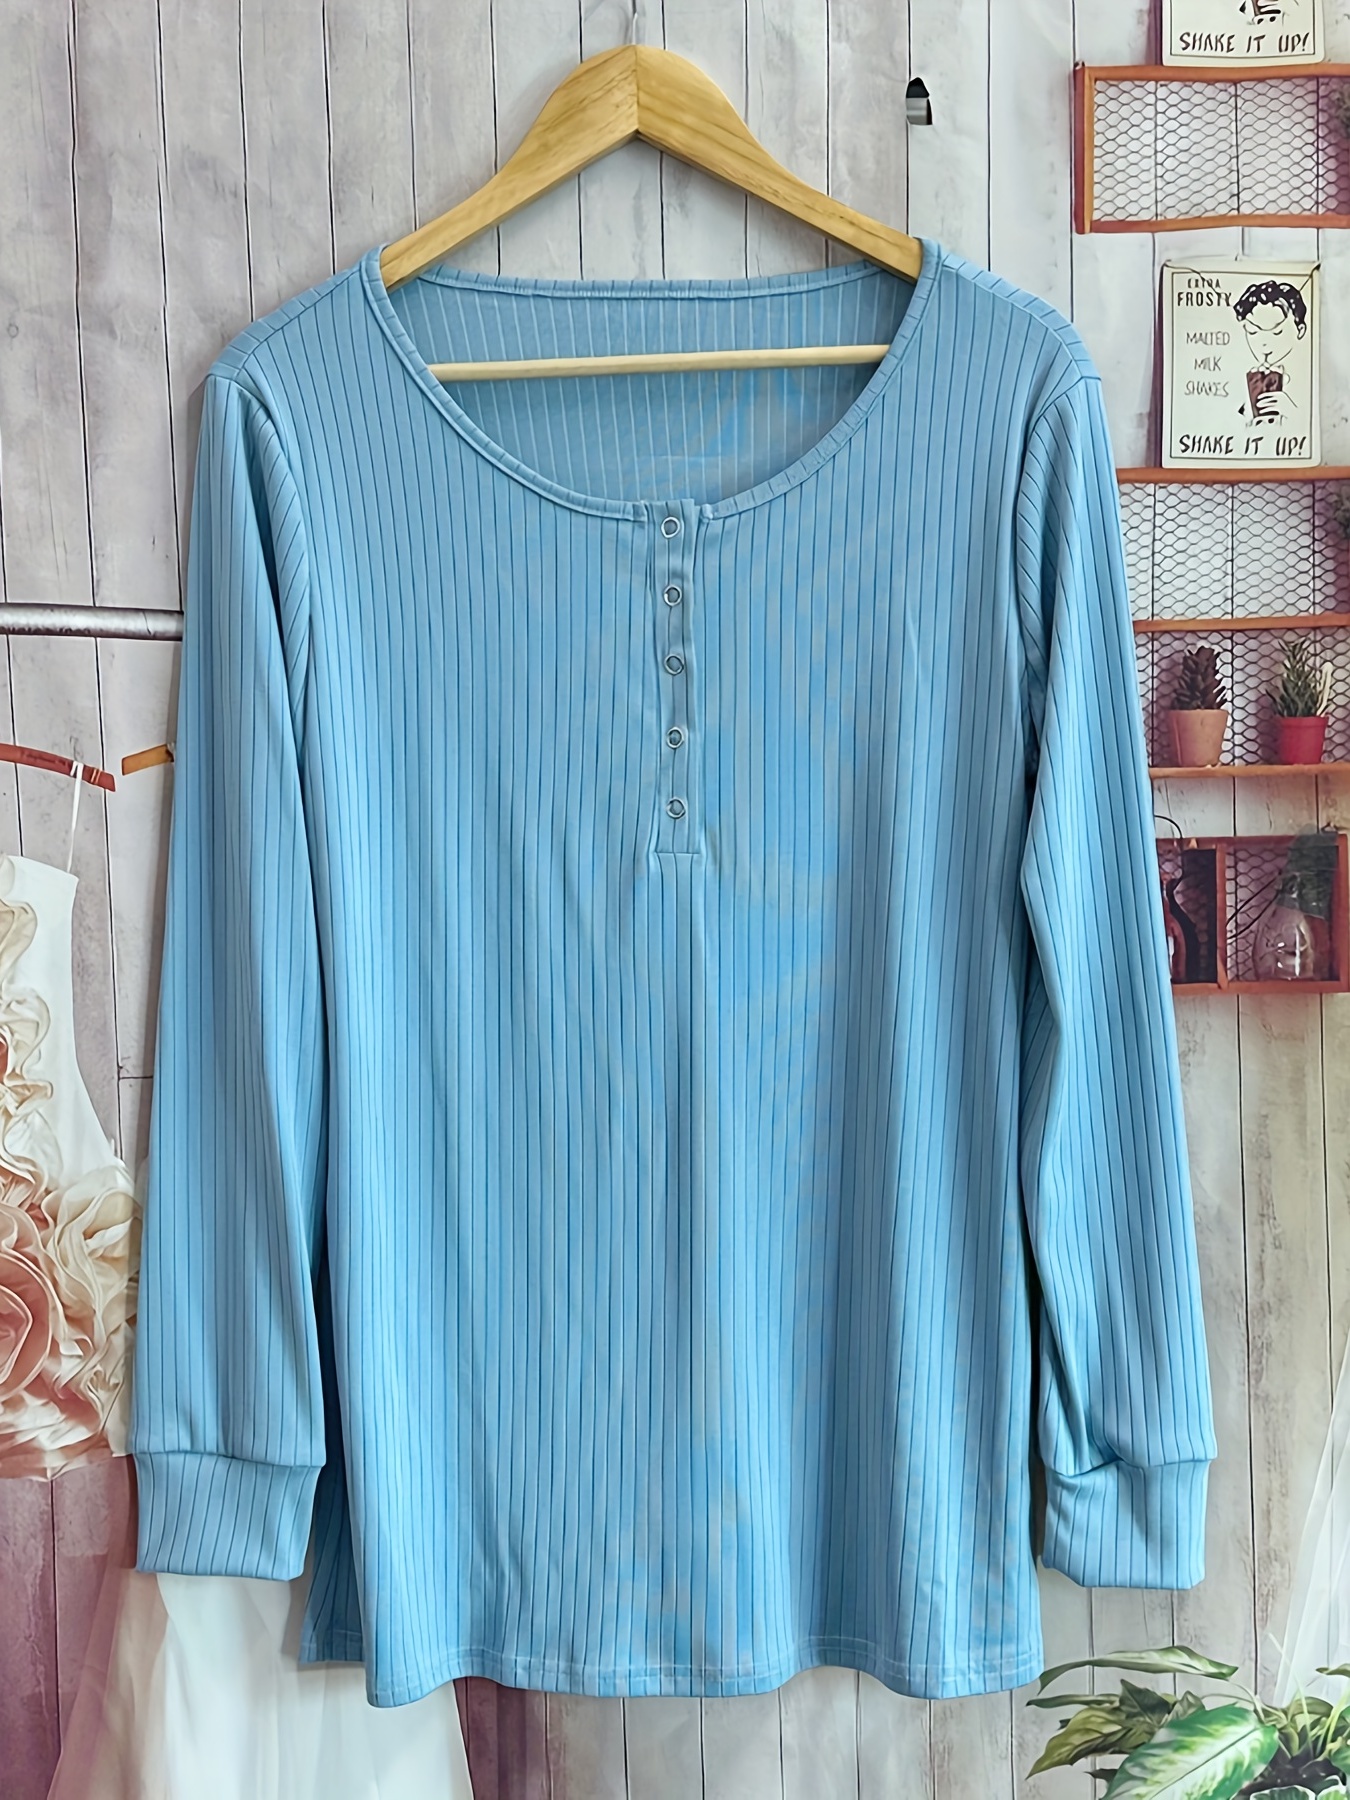 Long Sleeve Ribbed Knit Top in Milk